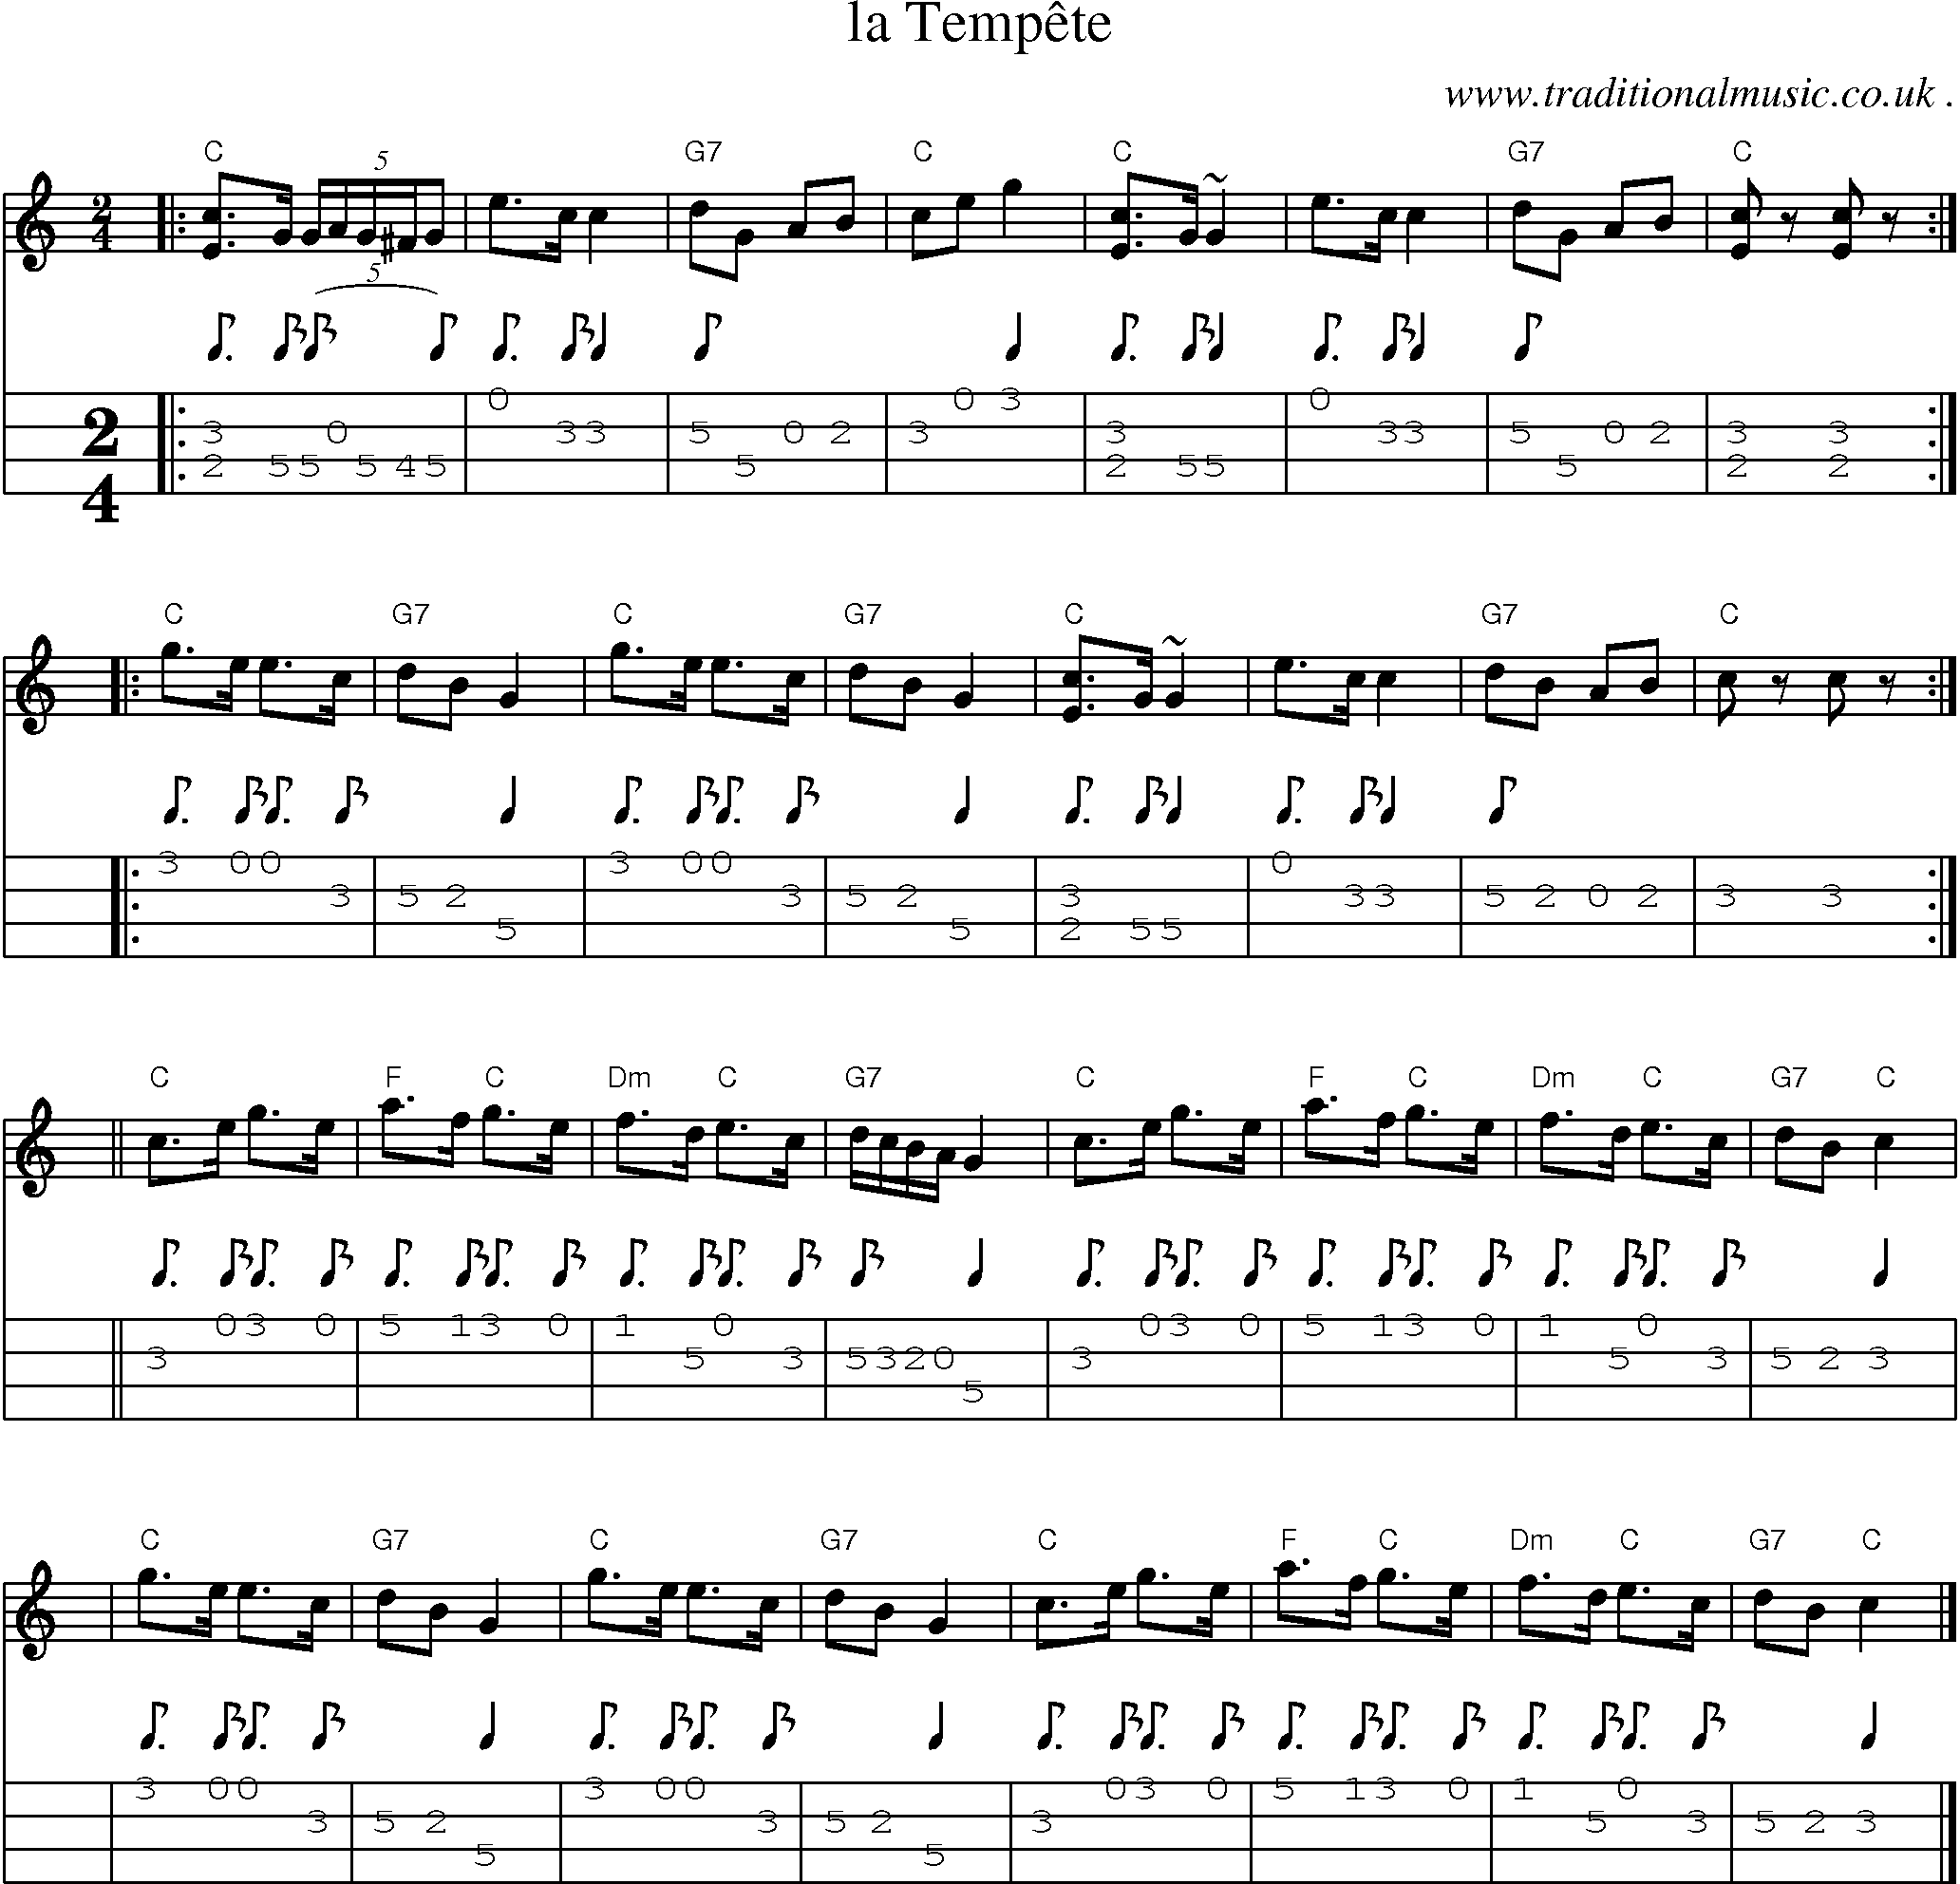 Sheet-music  score, Chords and Mandolin Tabs for La Tempete